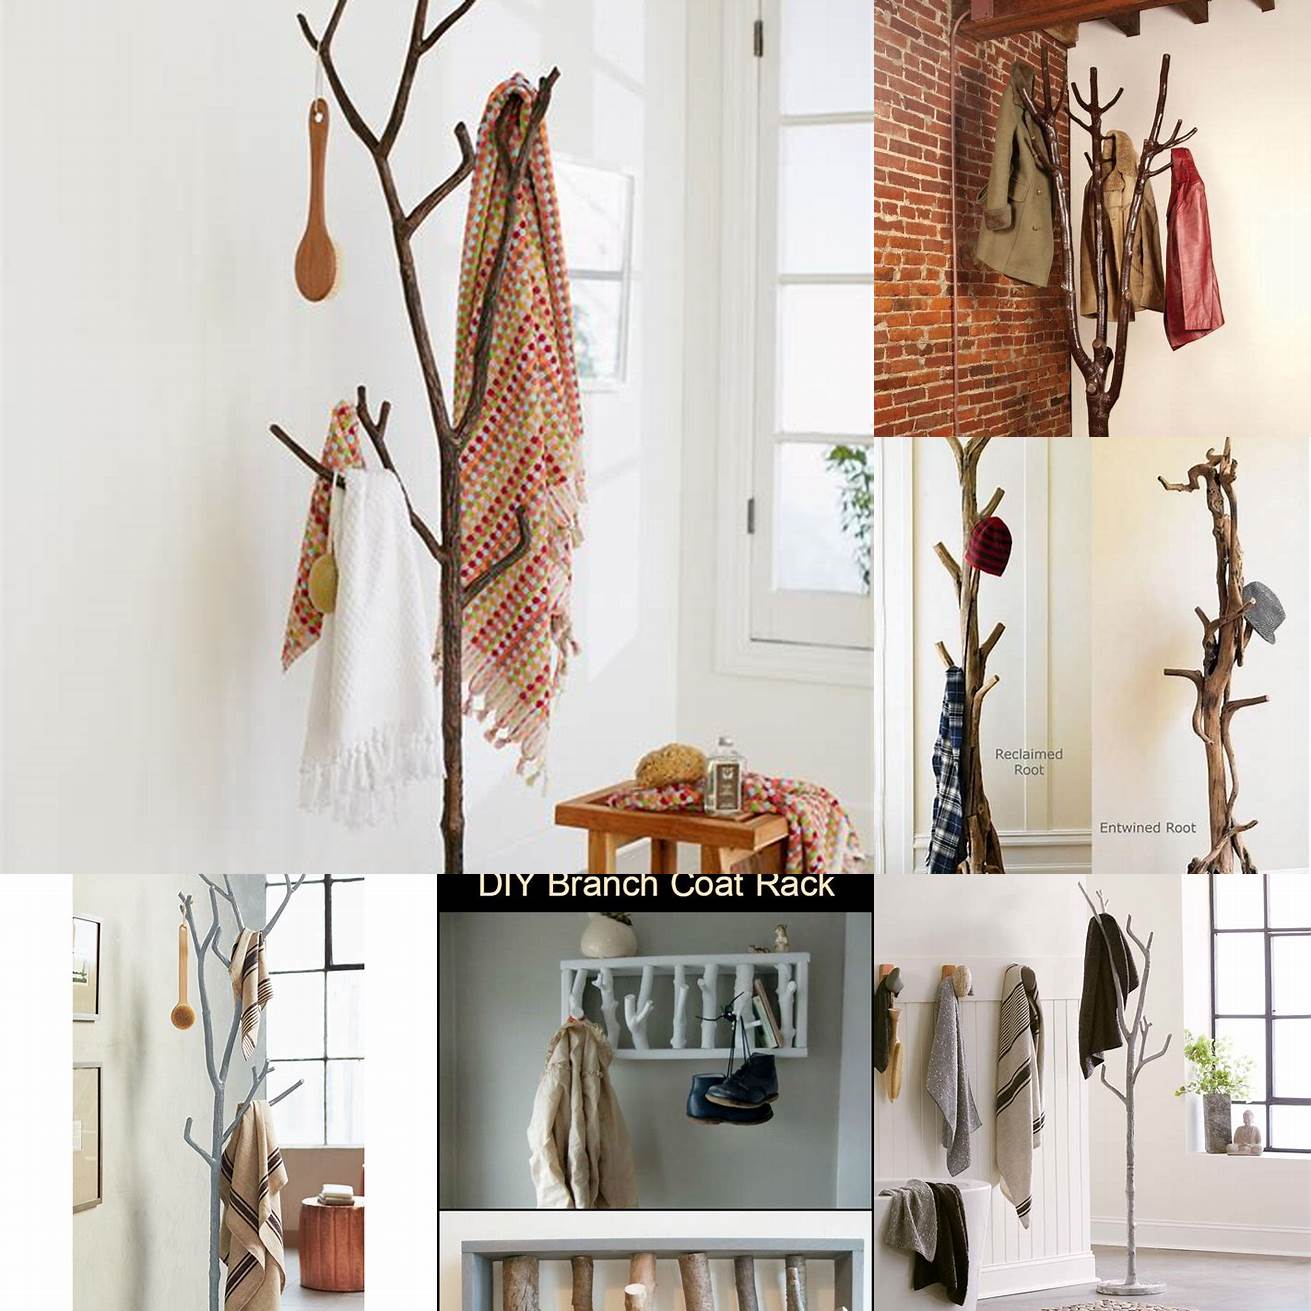 Make a branch coat rack Use fallen branches to create a rustic and functional coat rack for your entryway